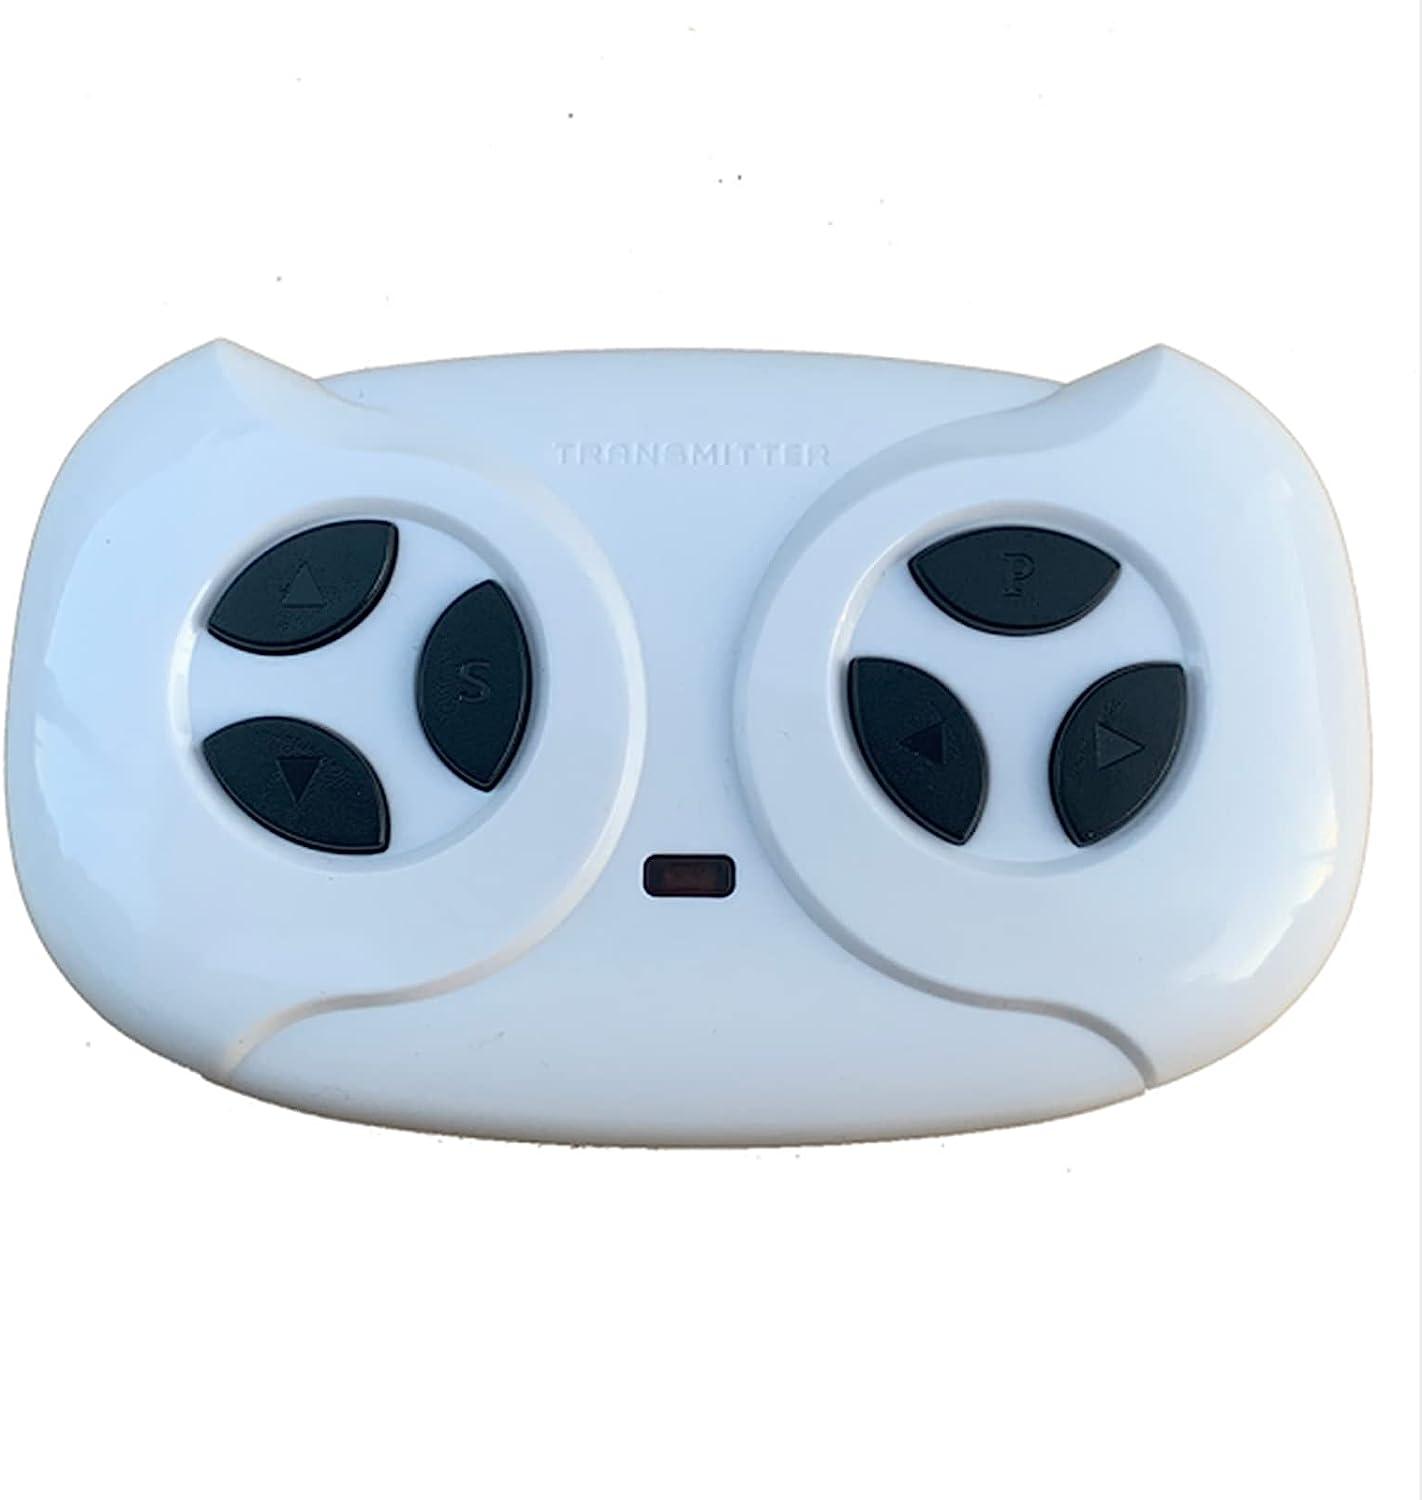 PATOYS | White JR 2.4G JR-RX-12V, JR1810 series Bluetooth Remote Controller For Kids Ride Ons Toys Remote Controller PATOYS